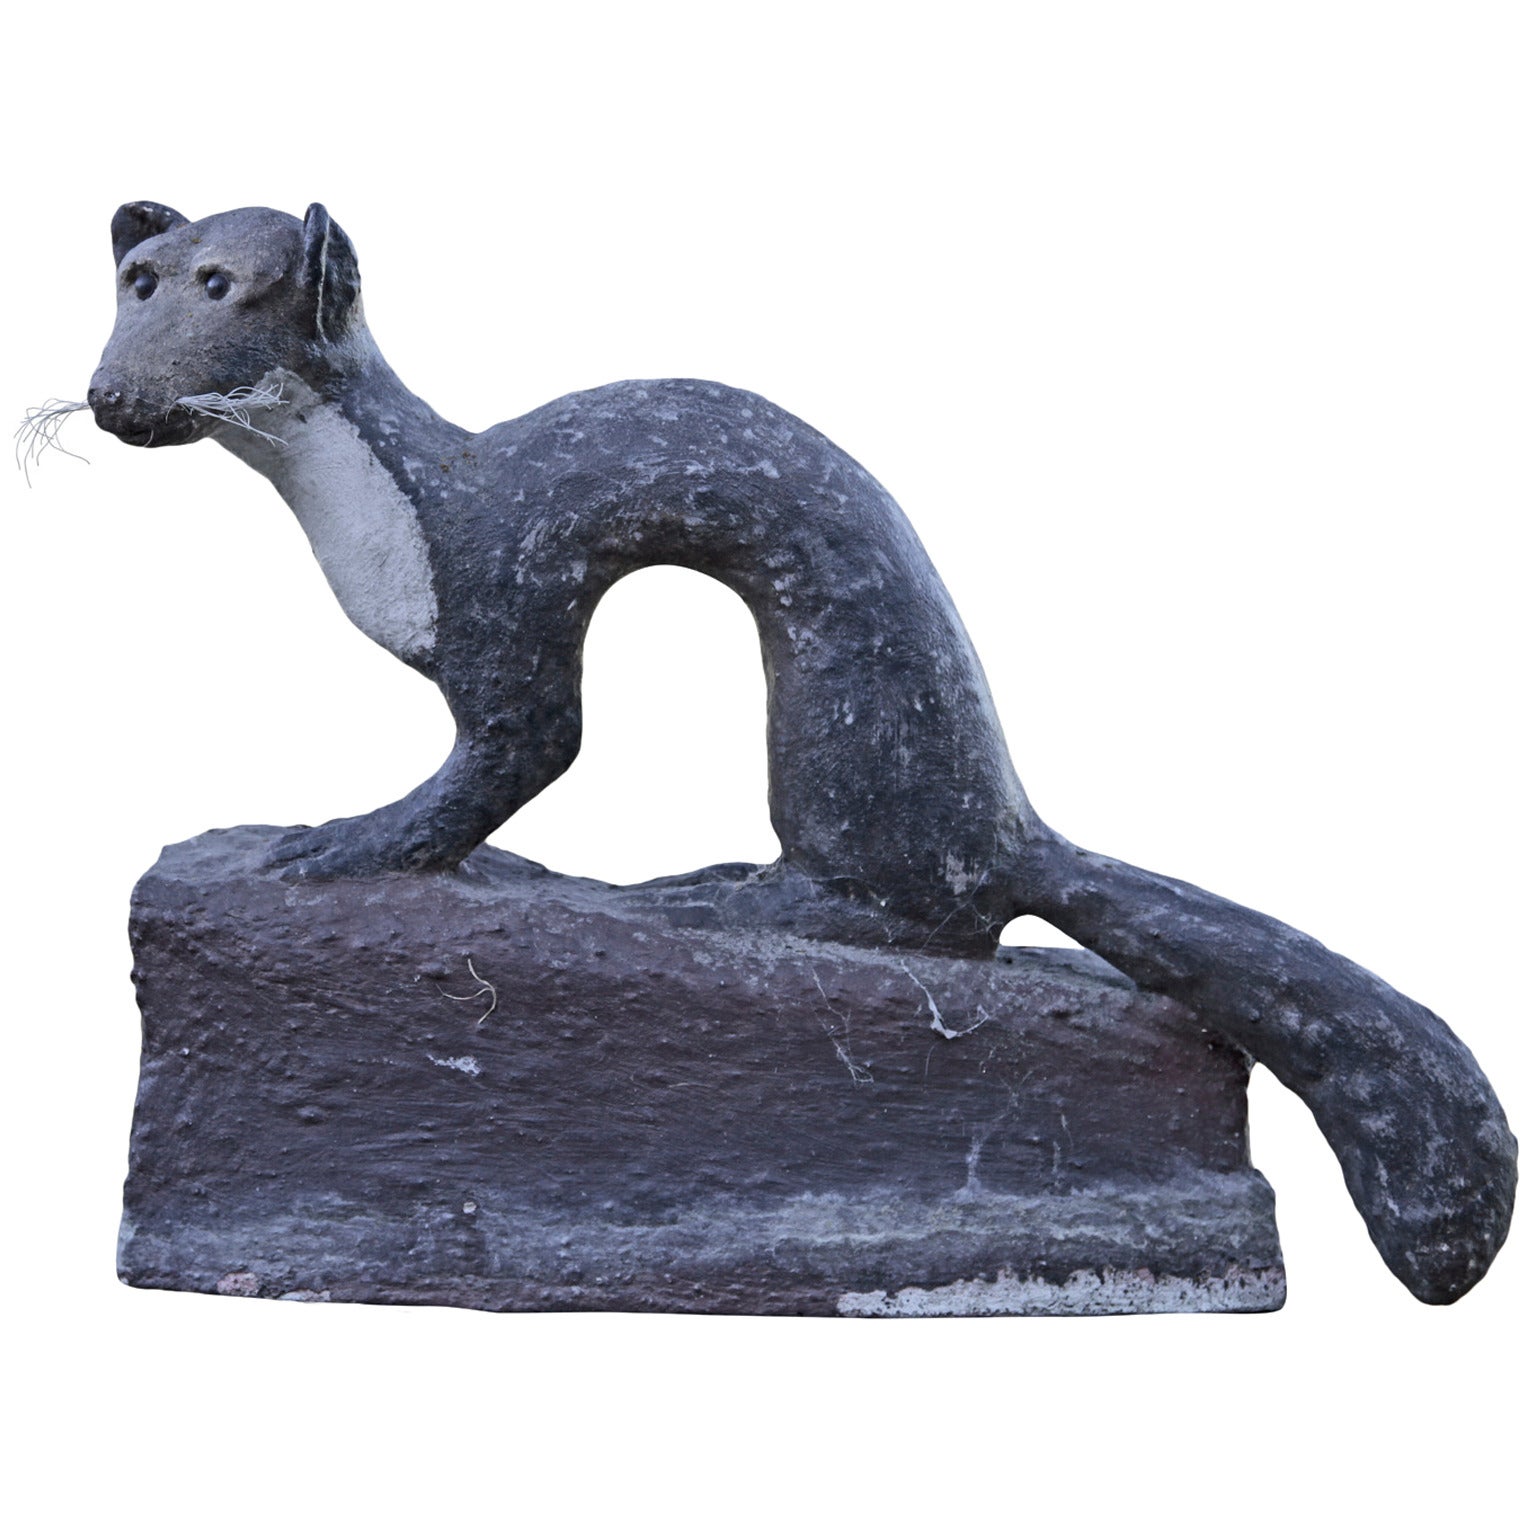 Cast Stone Weasel Sculpture by Kiefer, from the 1950s.